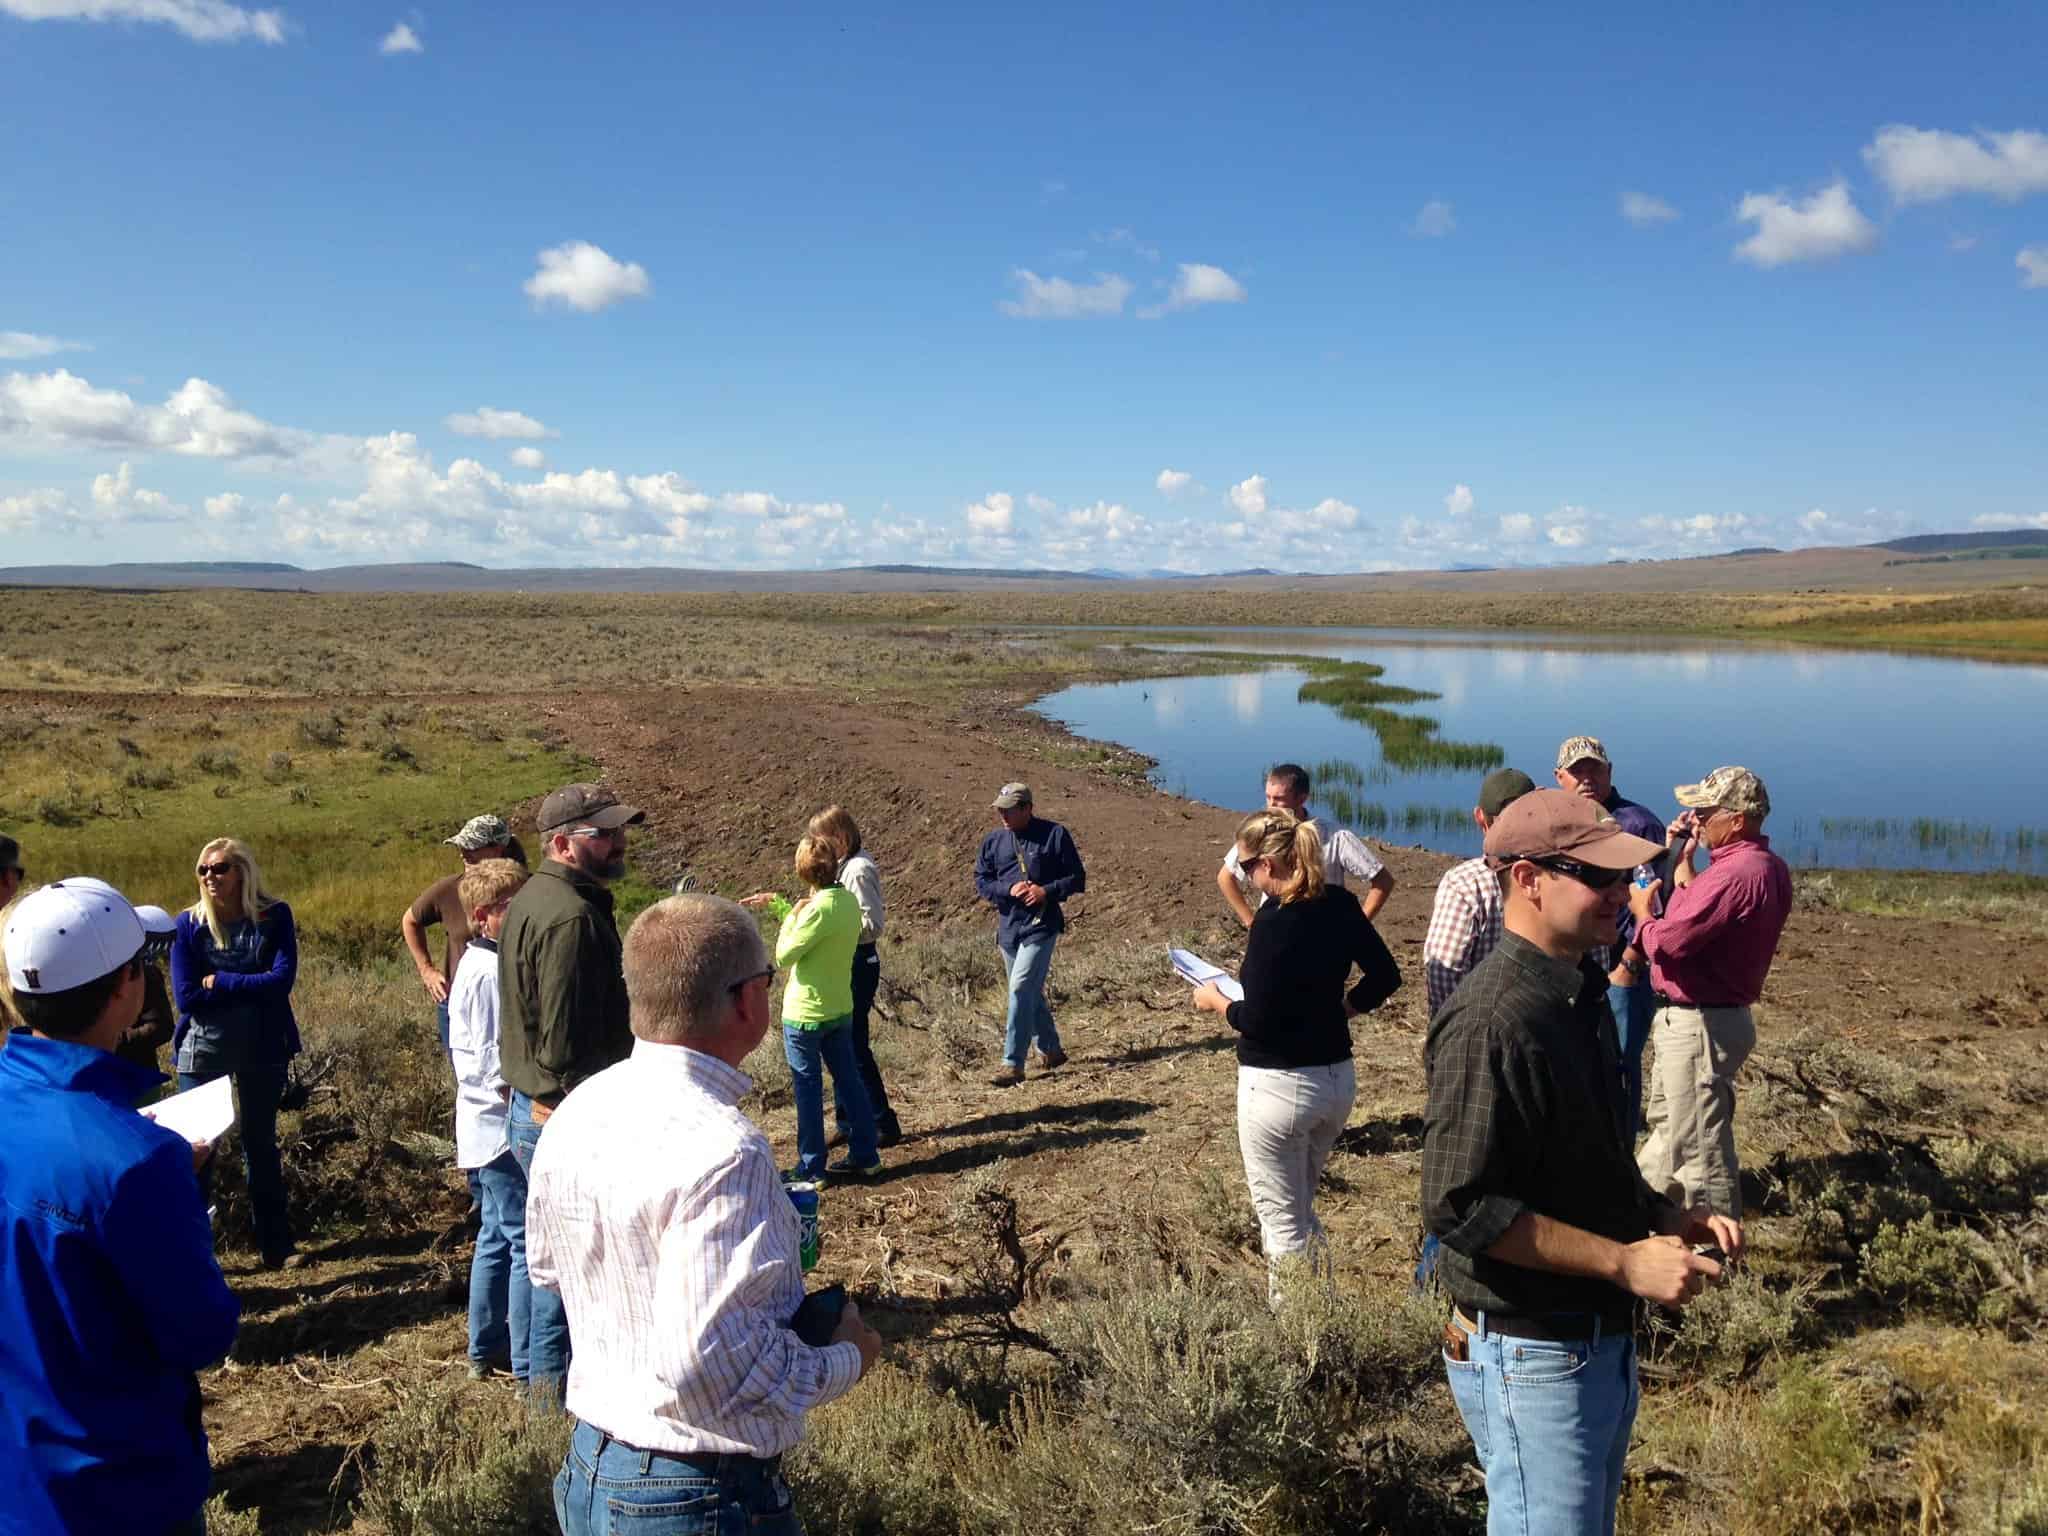 Partners tour a conservation project along the Green River in Wyoming.